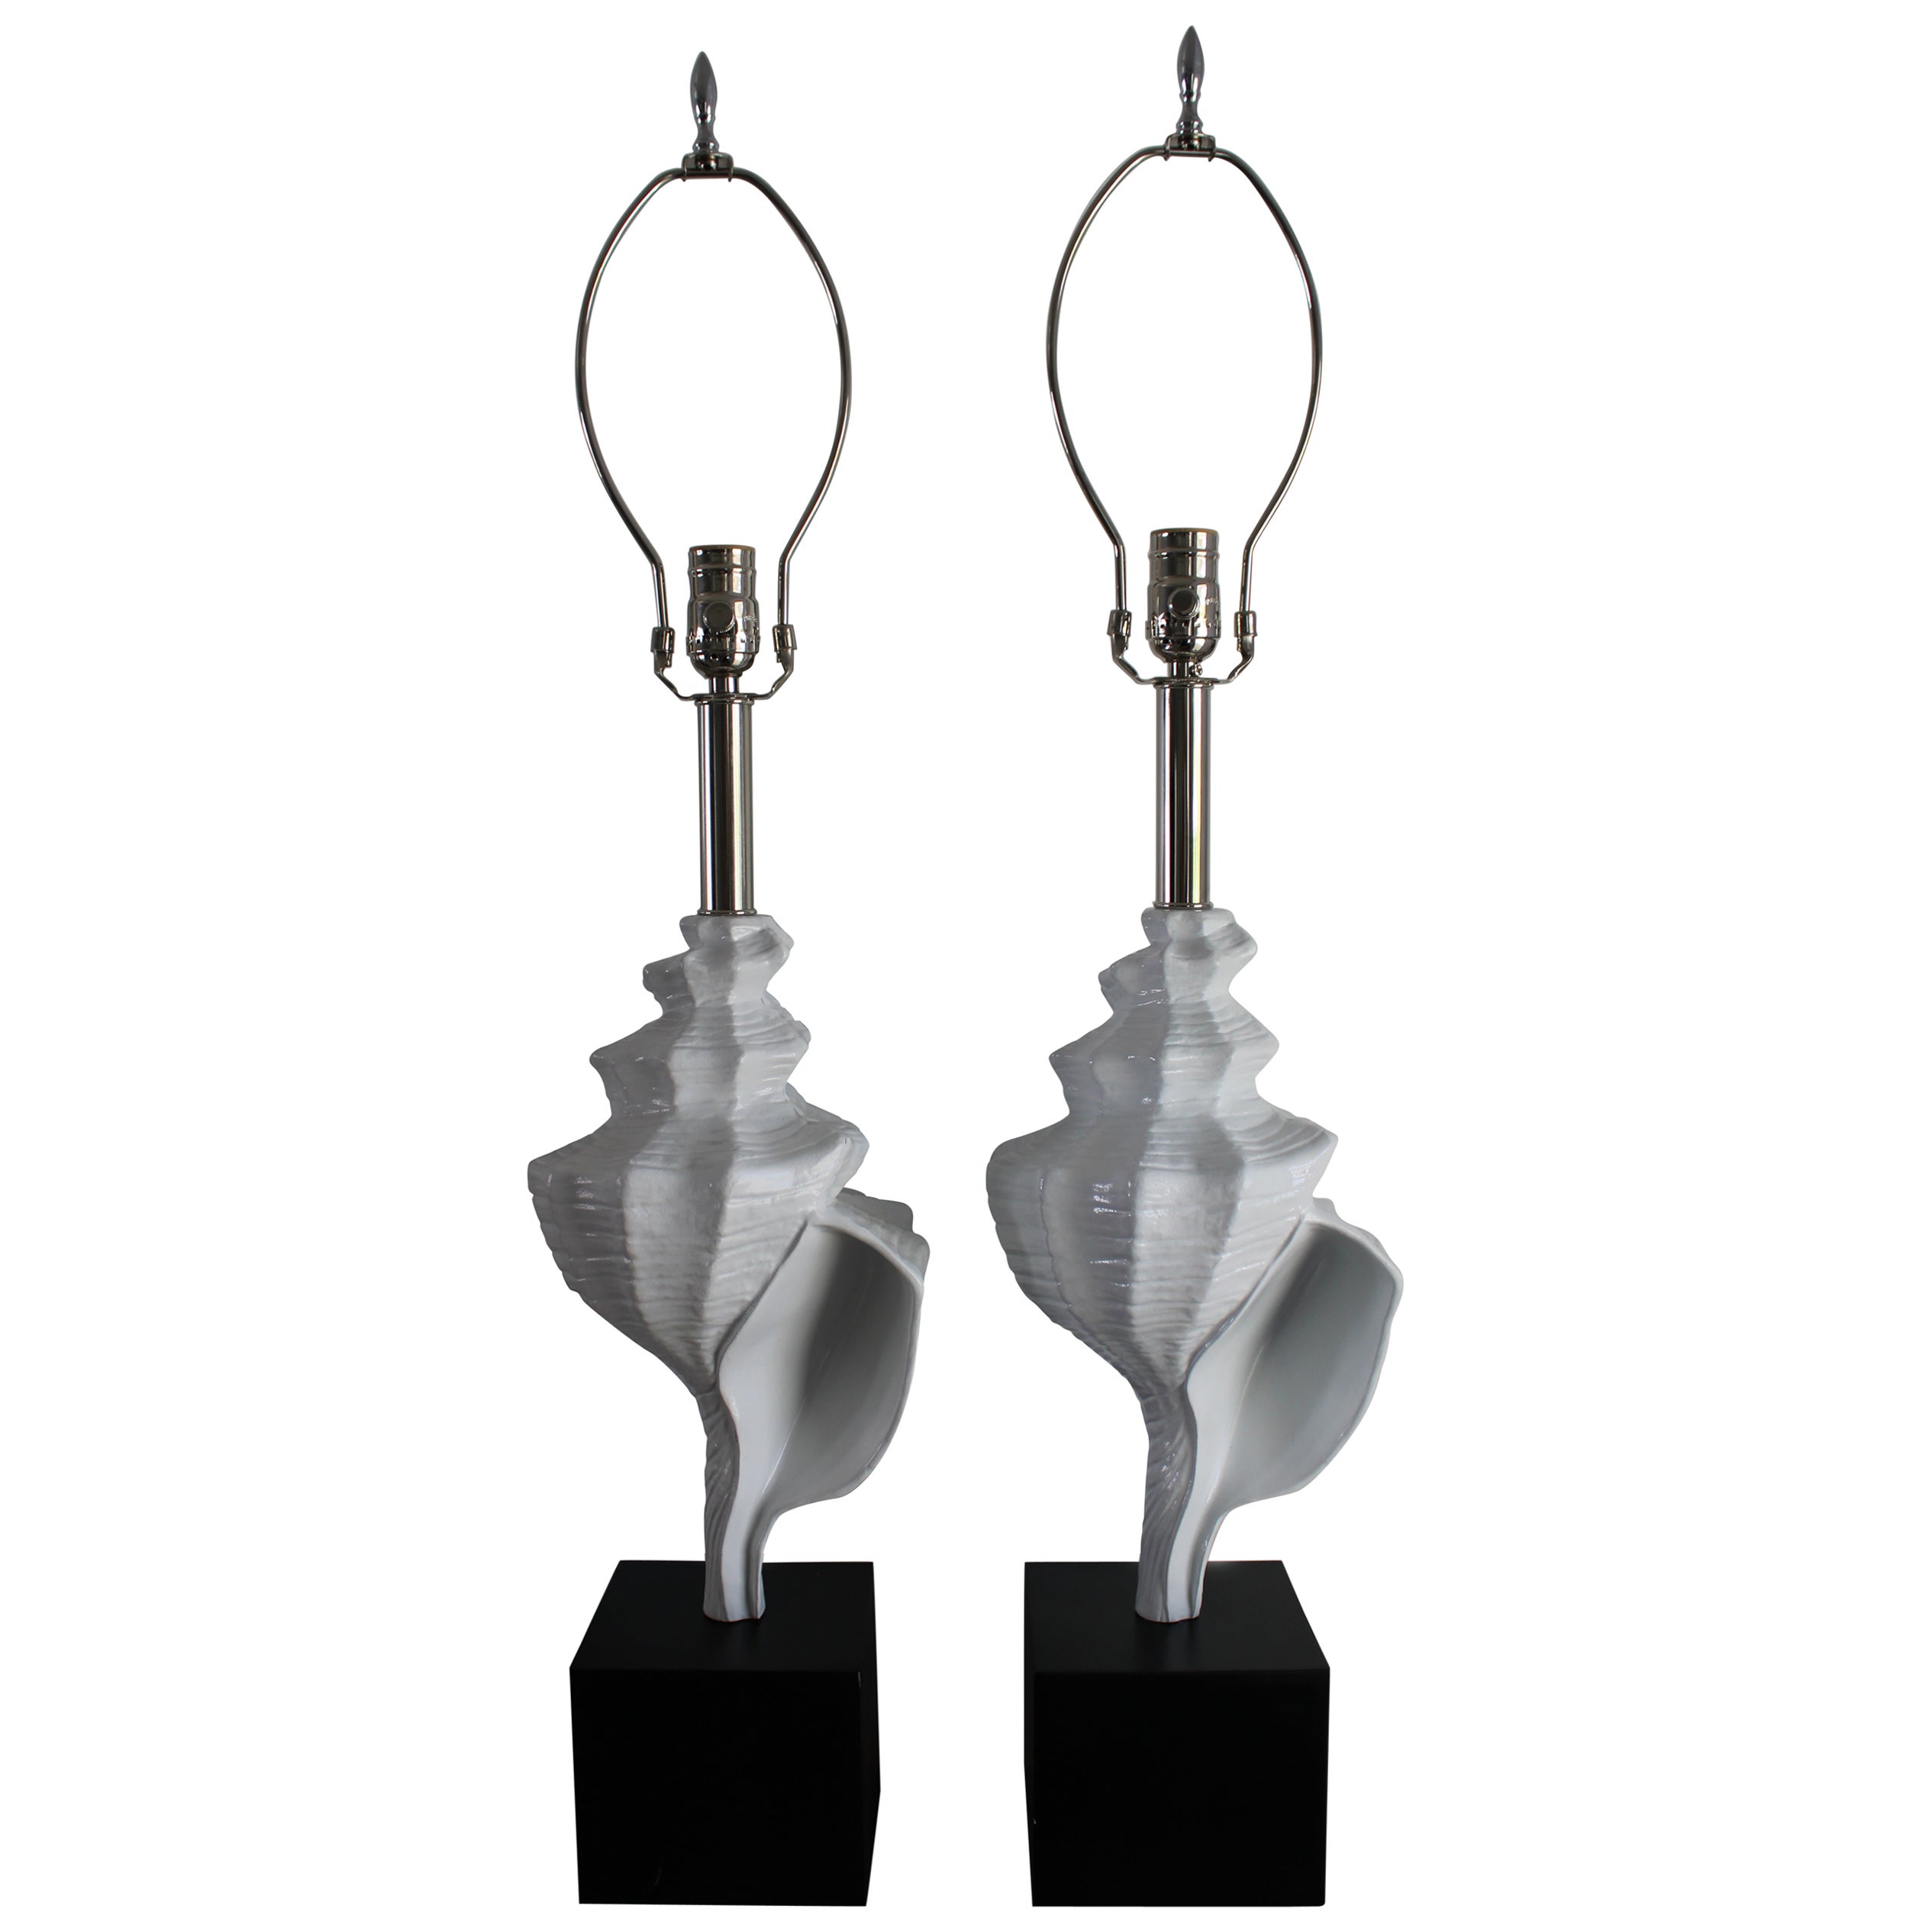 Pair of Aluminum Seashell Lamps Attributed to the Laurel Lamp Co.